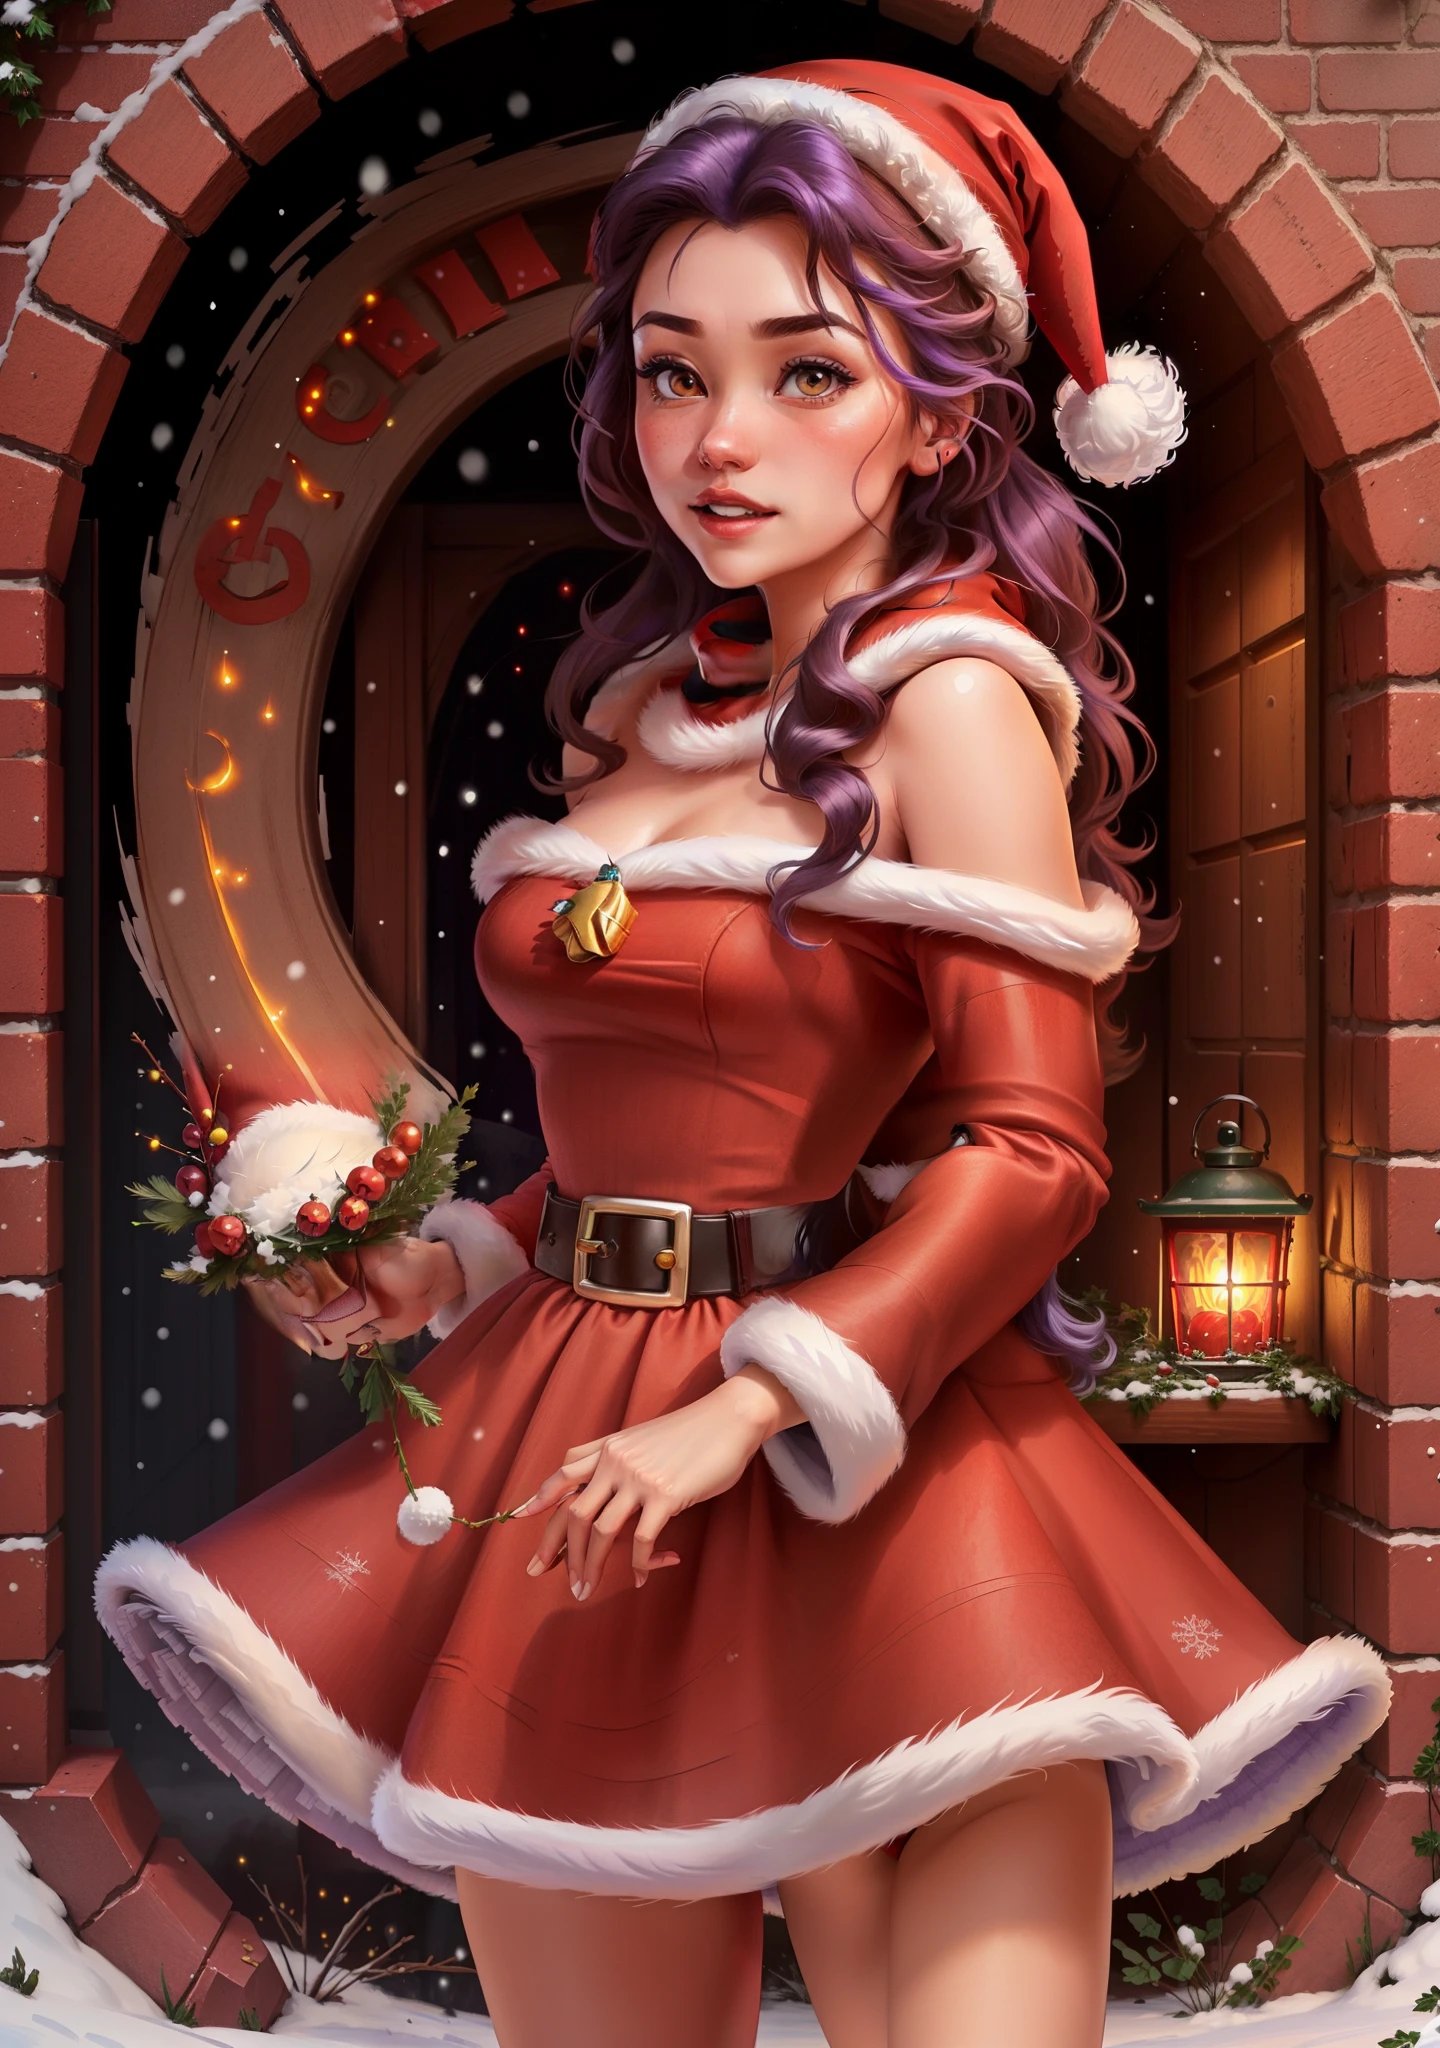 (BelleWaifu:1), (red santa claus hat:1.5), Snow in the background, Surprised, Cute, cute pose, looking at the viewer, (Square hairstyle), (purple hair), (red skirt:1.2), (purple fluffy sweater on a naked body:1.2), :d, (Realistic: 1), (cartoony), (Masterpiece: 1.2), (Best Quality), (over-detailed), (8k, 4K, Intricate), (full-body shooting: 1), (Cowboy shot: 1.2), (85 mm), light particles, illumination, (Very detailed: 1.2), (detailed Face: 1.2), (gradients), SFW, Colorful, (Detailed eyes: 1.2), (detailed winter landscape, snowy trees, garden, lock:1.2),(detailed background), detailed landscape, (dynamic Angle:1.2), (dynamicpose:1.2), (rule three_composition:1.3), (line of action:1.2), wide view, day light, solo